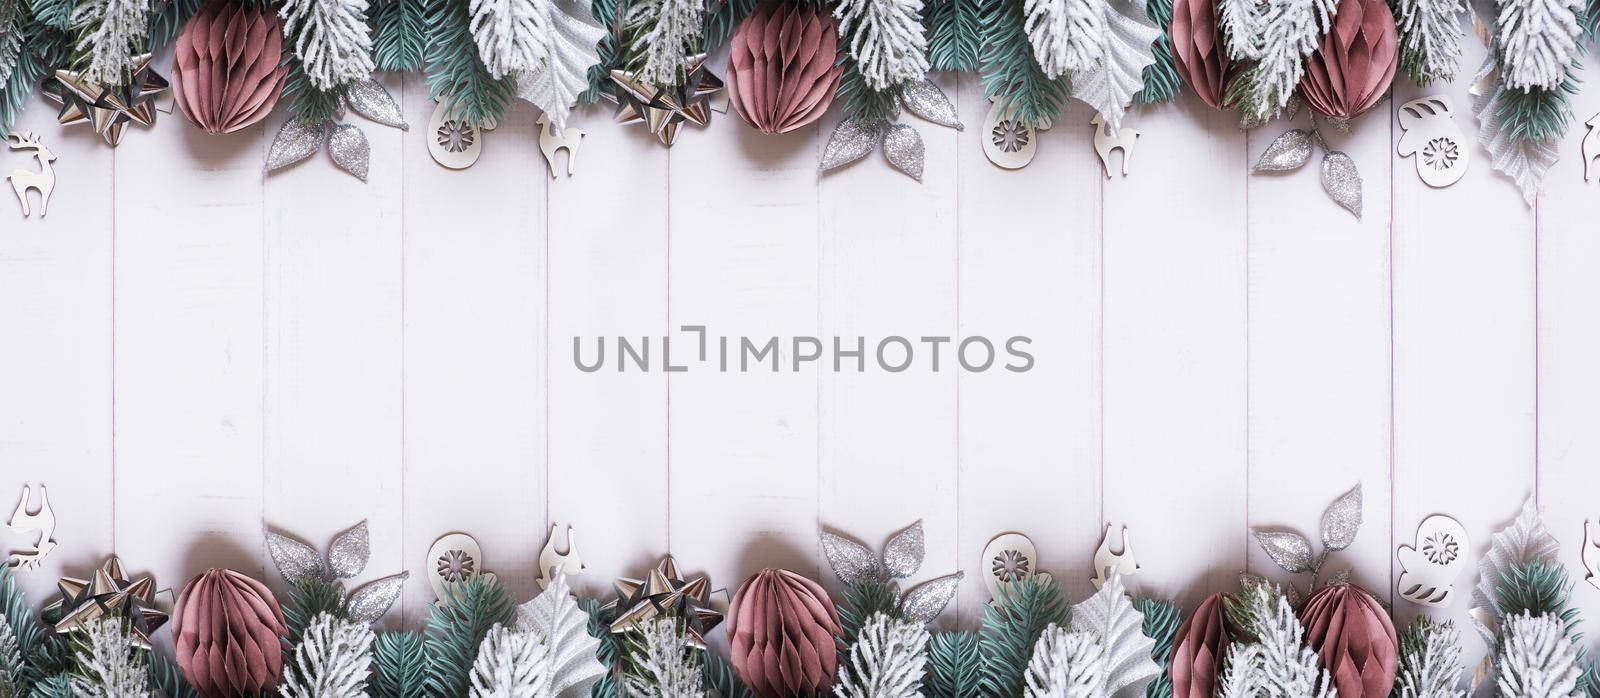 Christmas banner with flat lay snow pine trees, paper and wooden Christmas toys on wooden background.